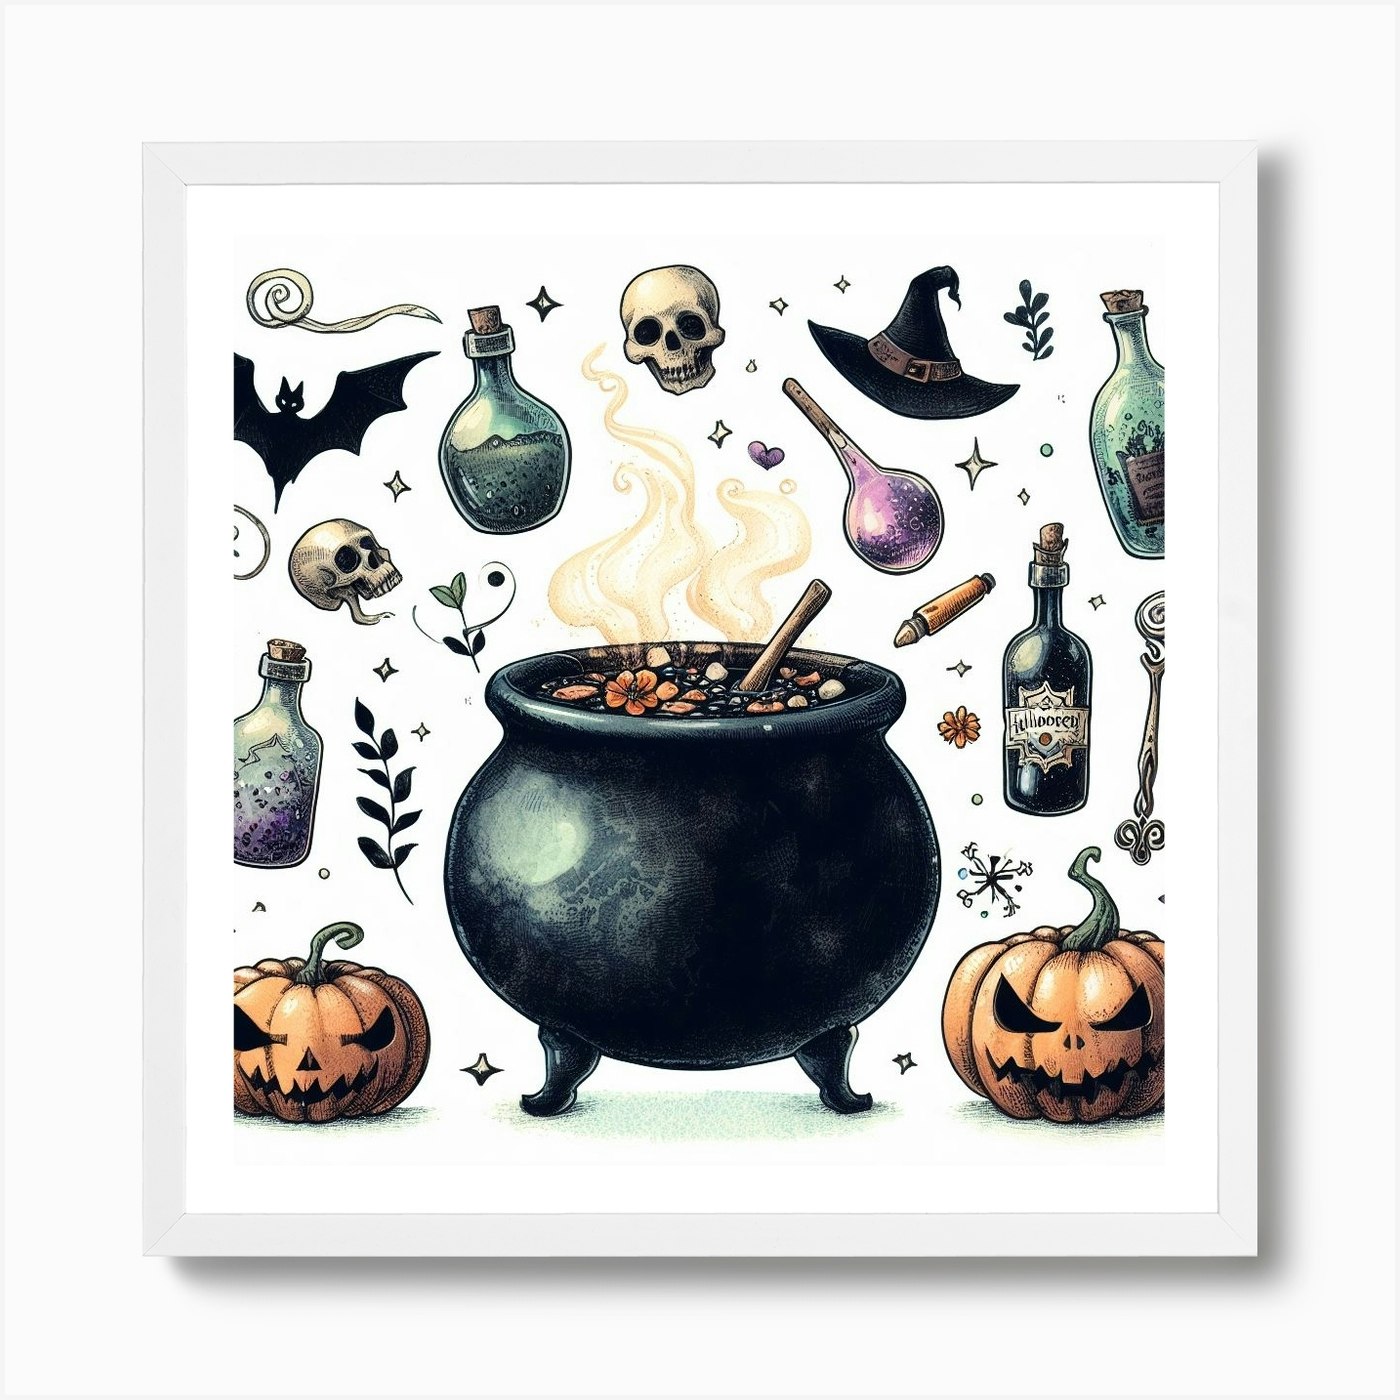 Halloween Cute Printable Wall Art, Spooky Halloween Decor, Watercolor Magic  Cauldron Witches' Brew Print, Halloween Poster, Instant Download 